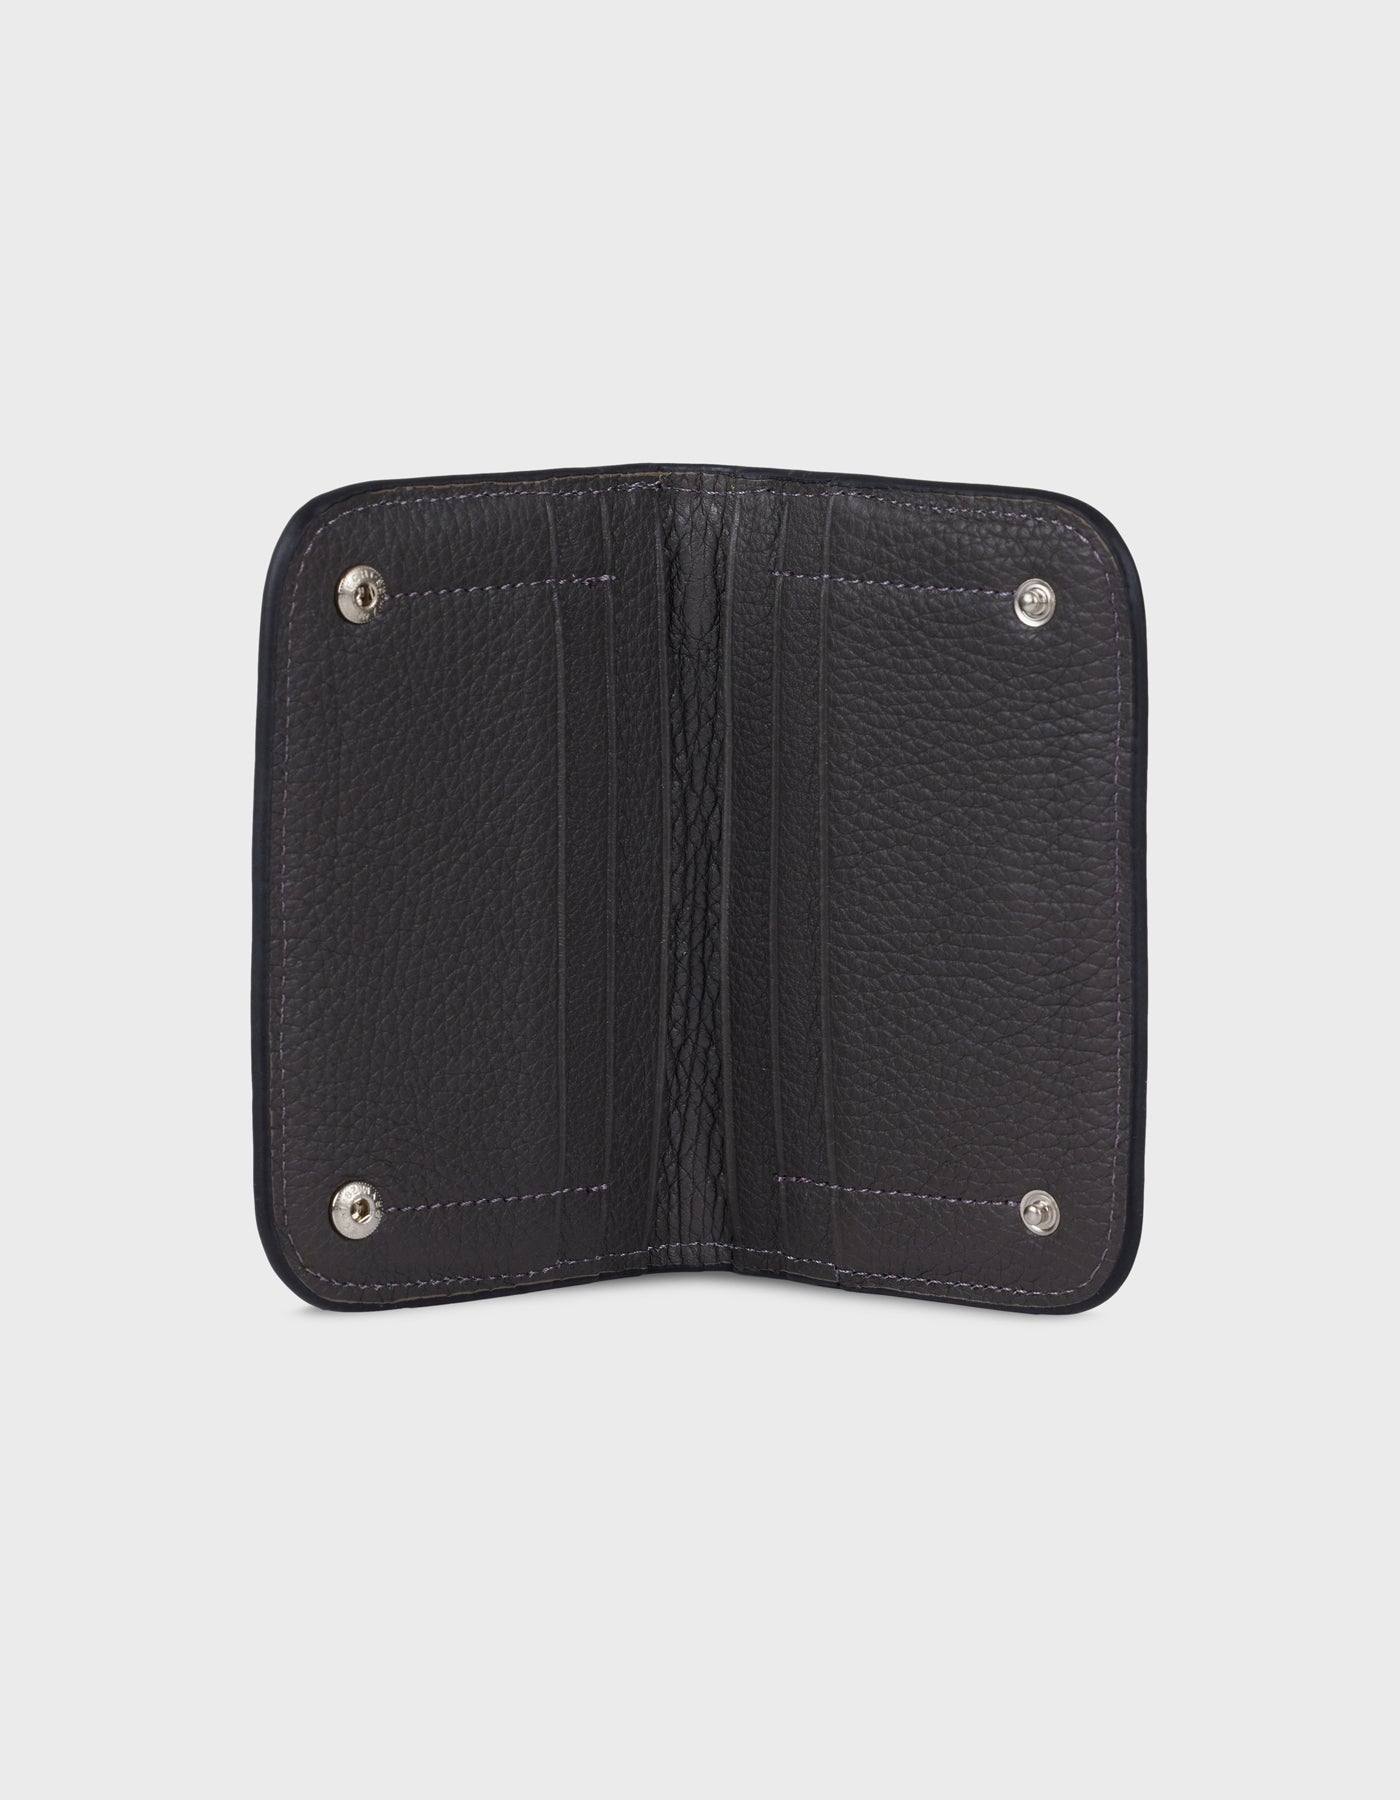 Hiva Atelier | Alae Coin Purse & Card Holder Anthracite | Beautiful and Versatile